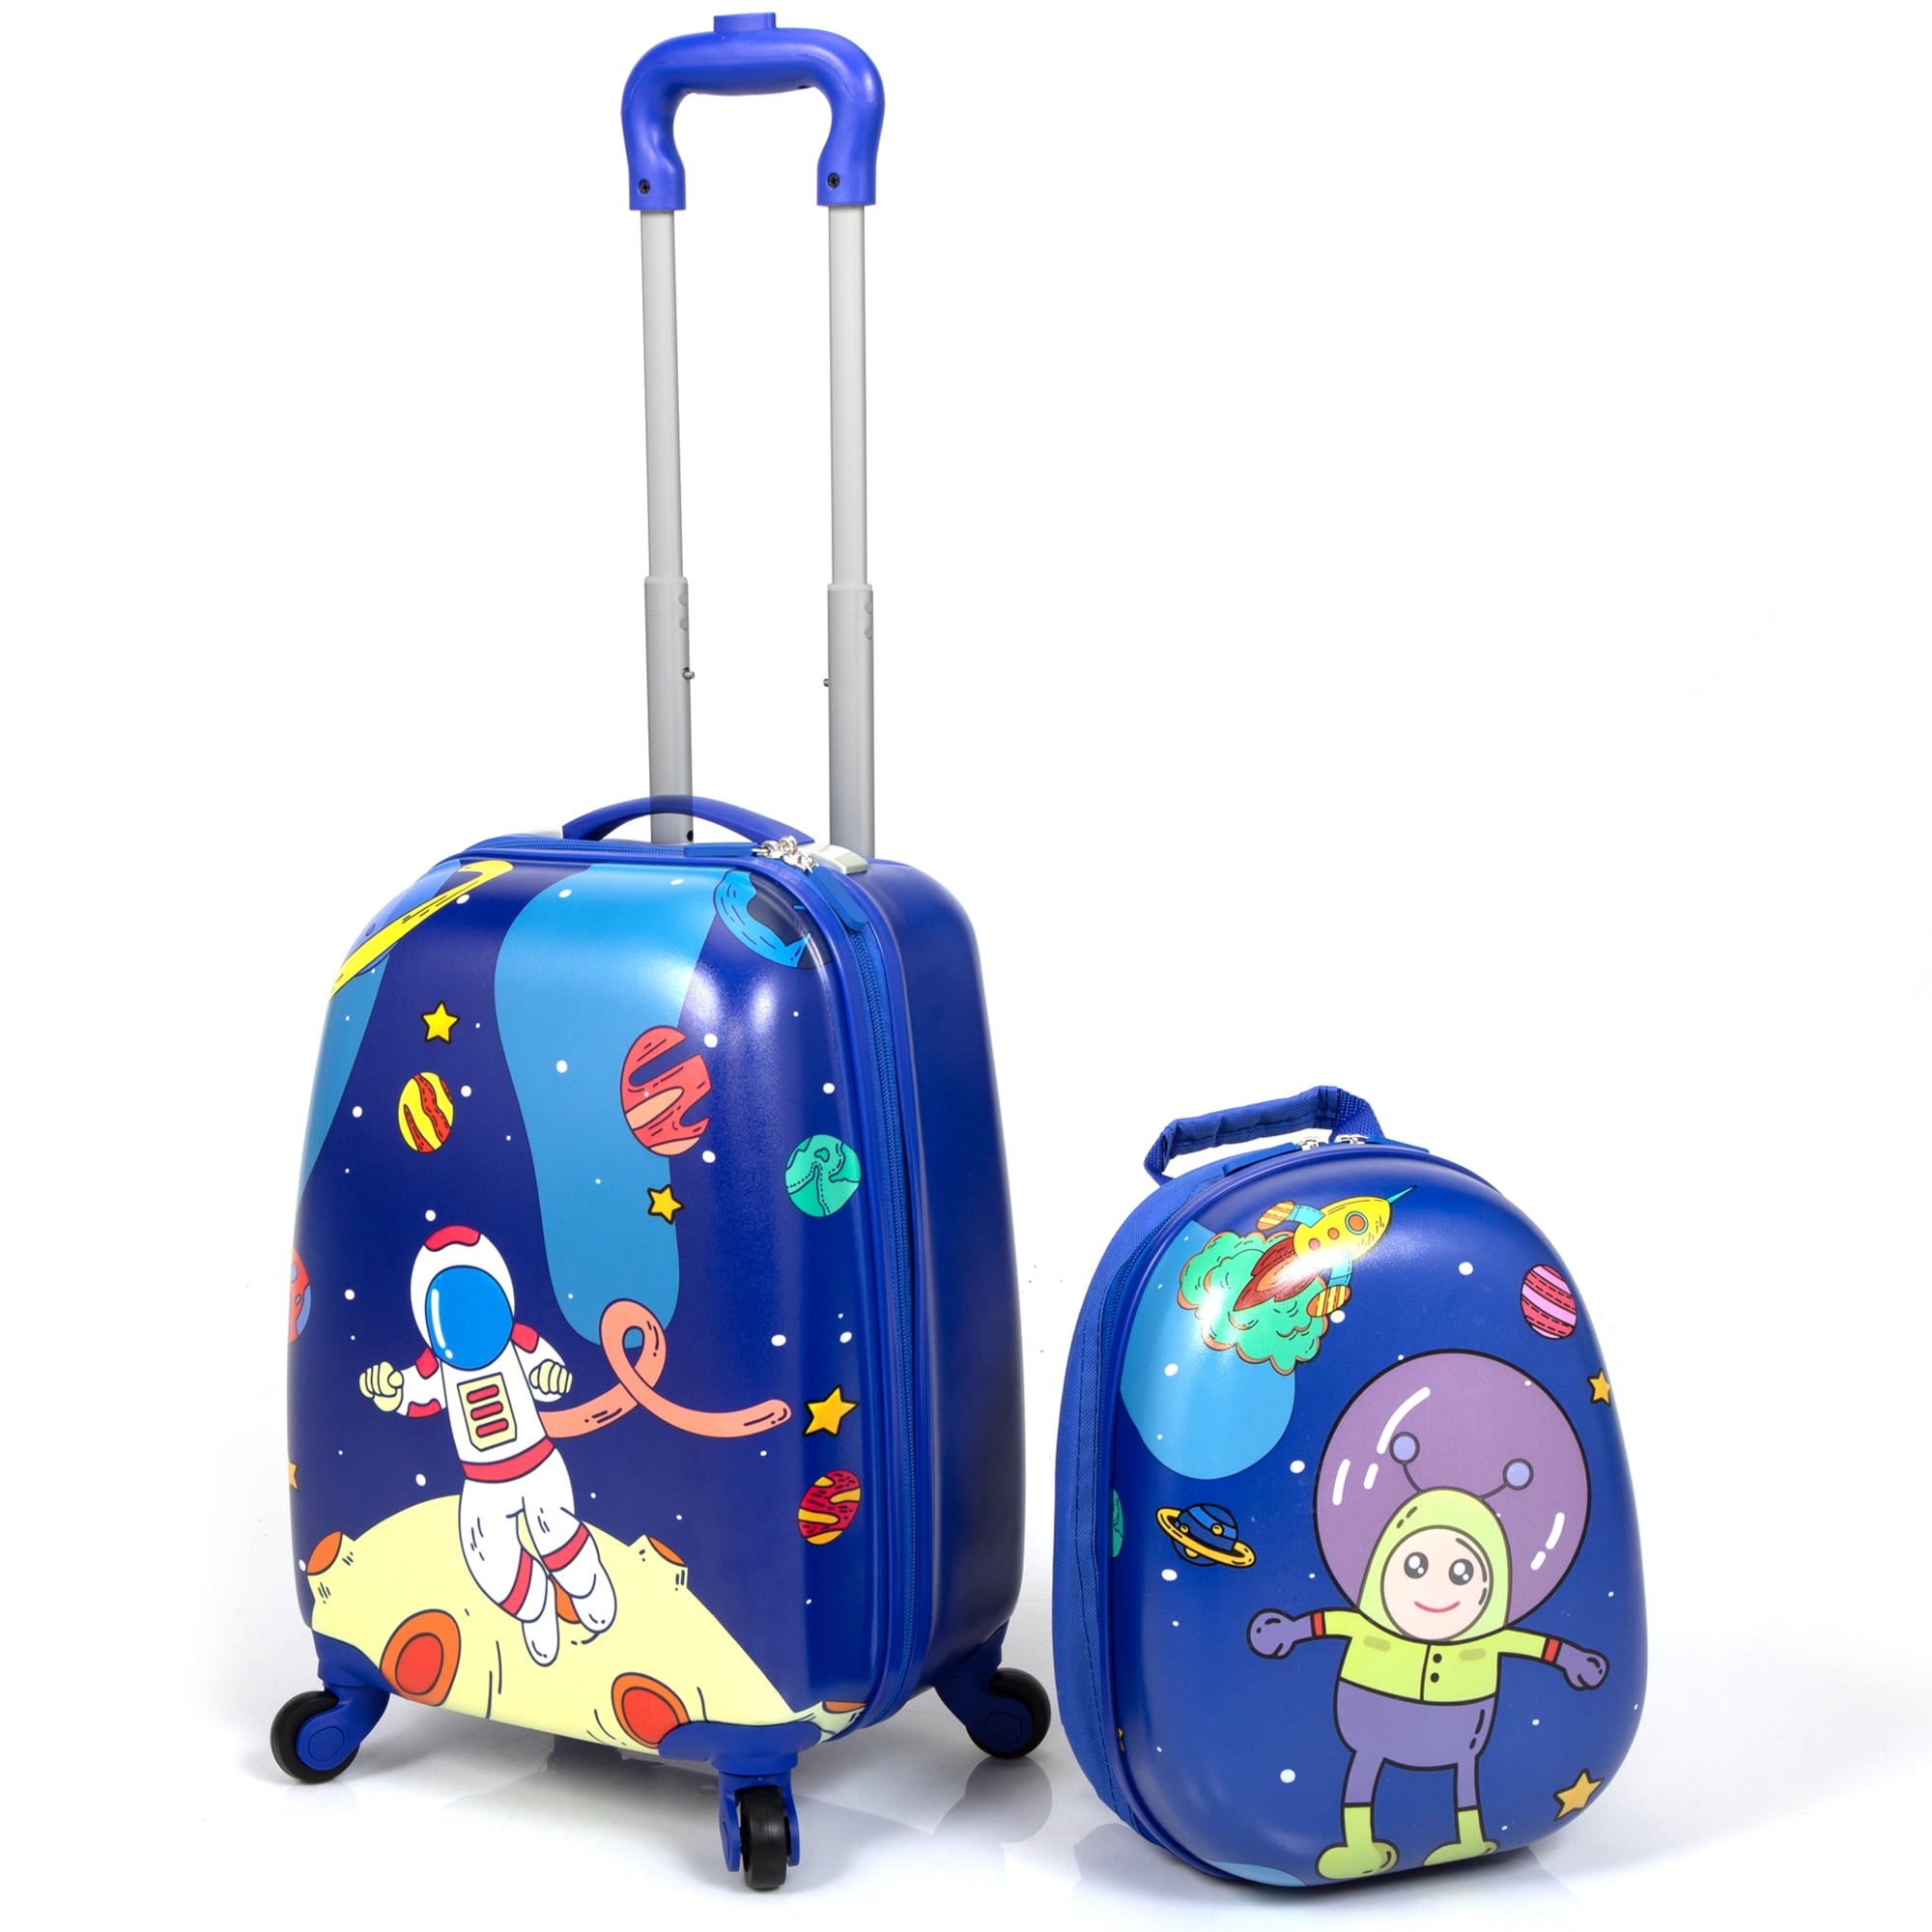 LHONE 2 Piece Kids Luggage Travel Set 12 16 Carry On Luggage for Kids Upright Hard Side Hard Shell 4 Wheel Travel Trolley ABS for Girls Boys Blue